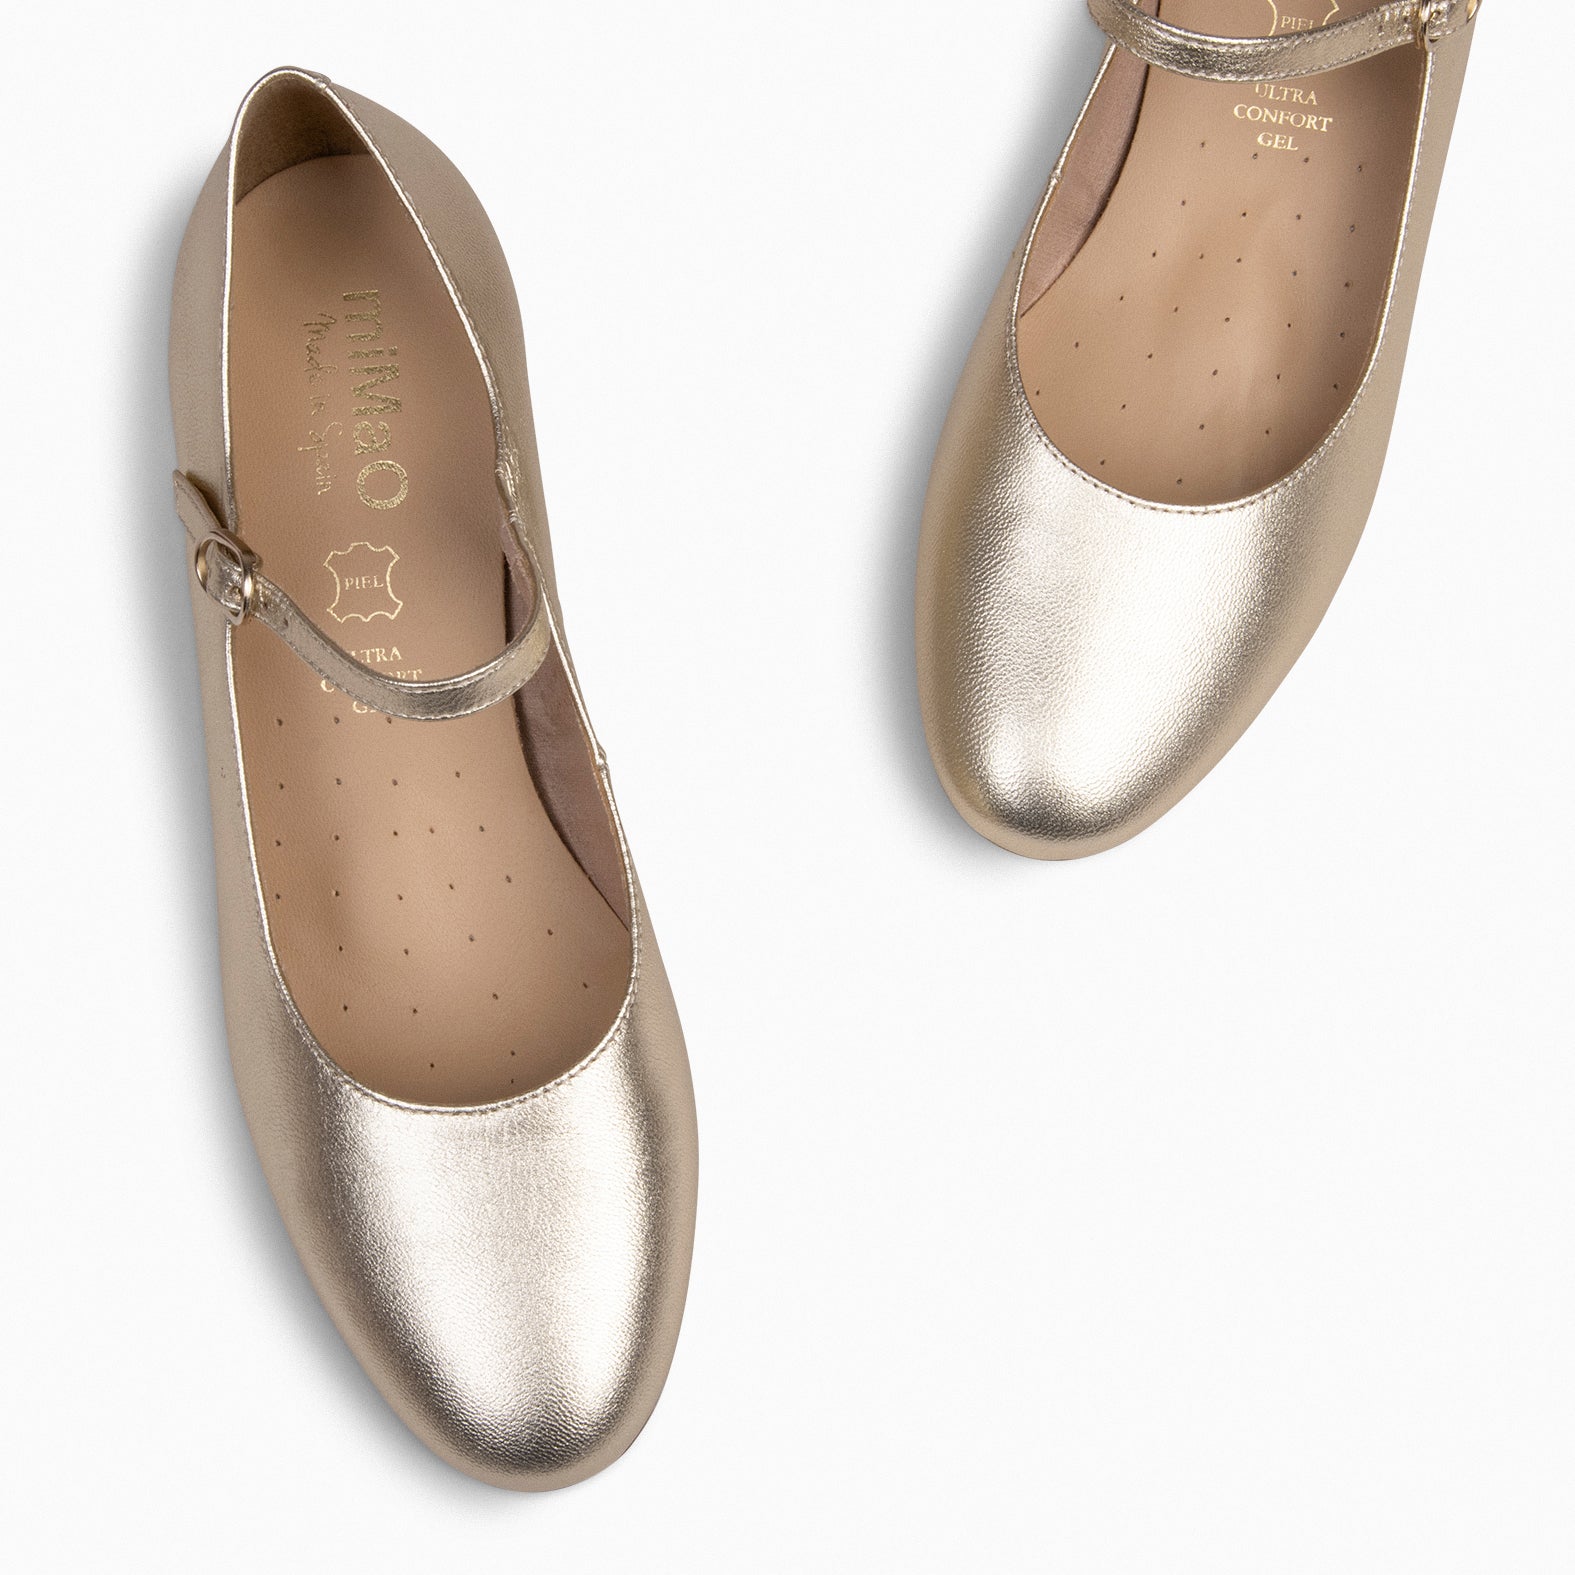 NORA – GOLDEN Mary-Janes with low heel 